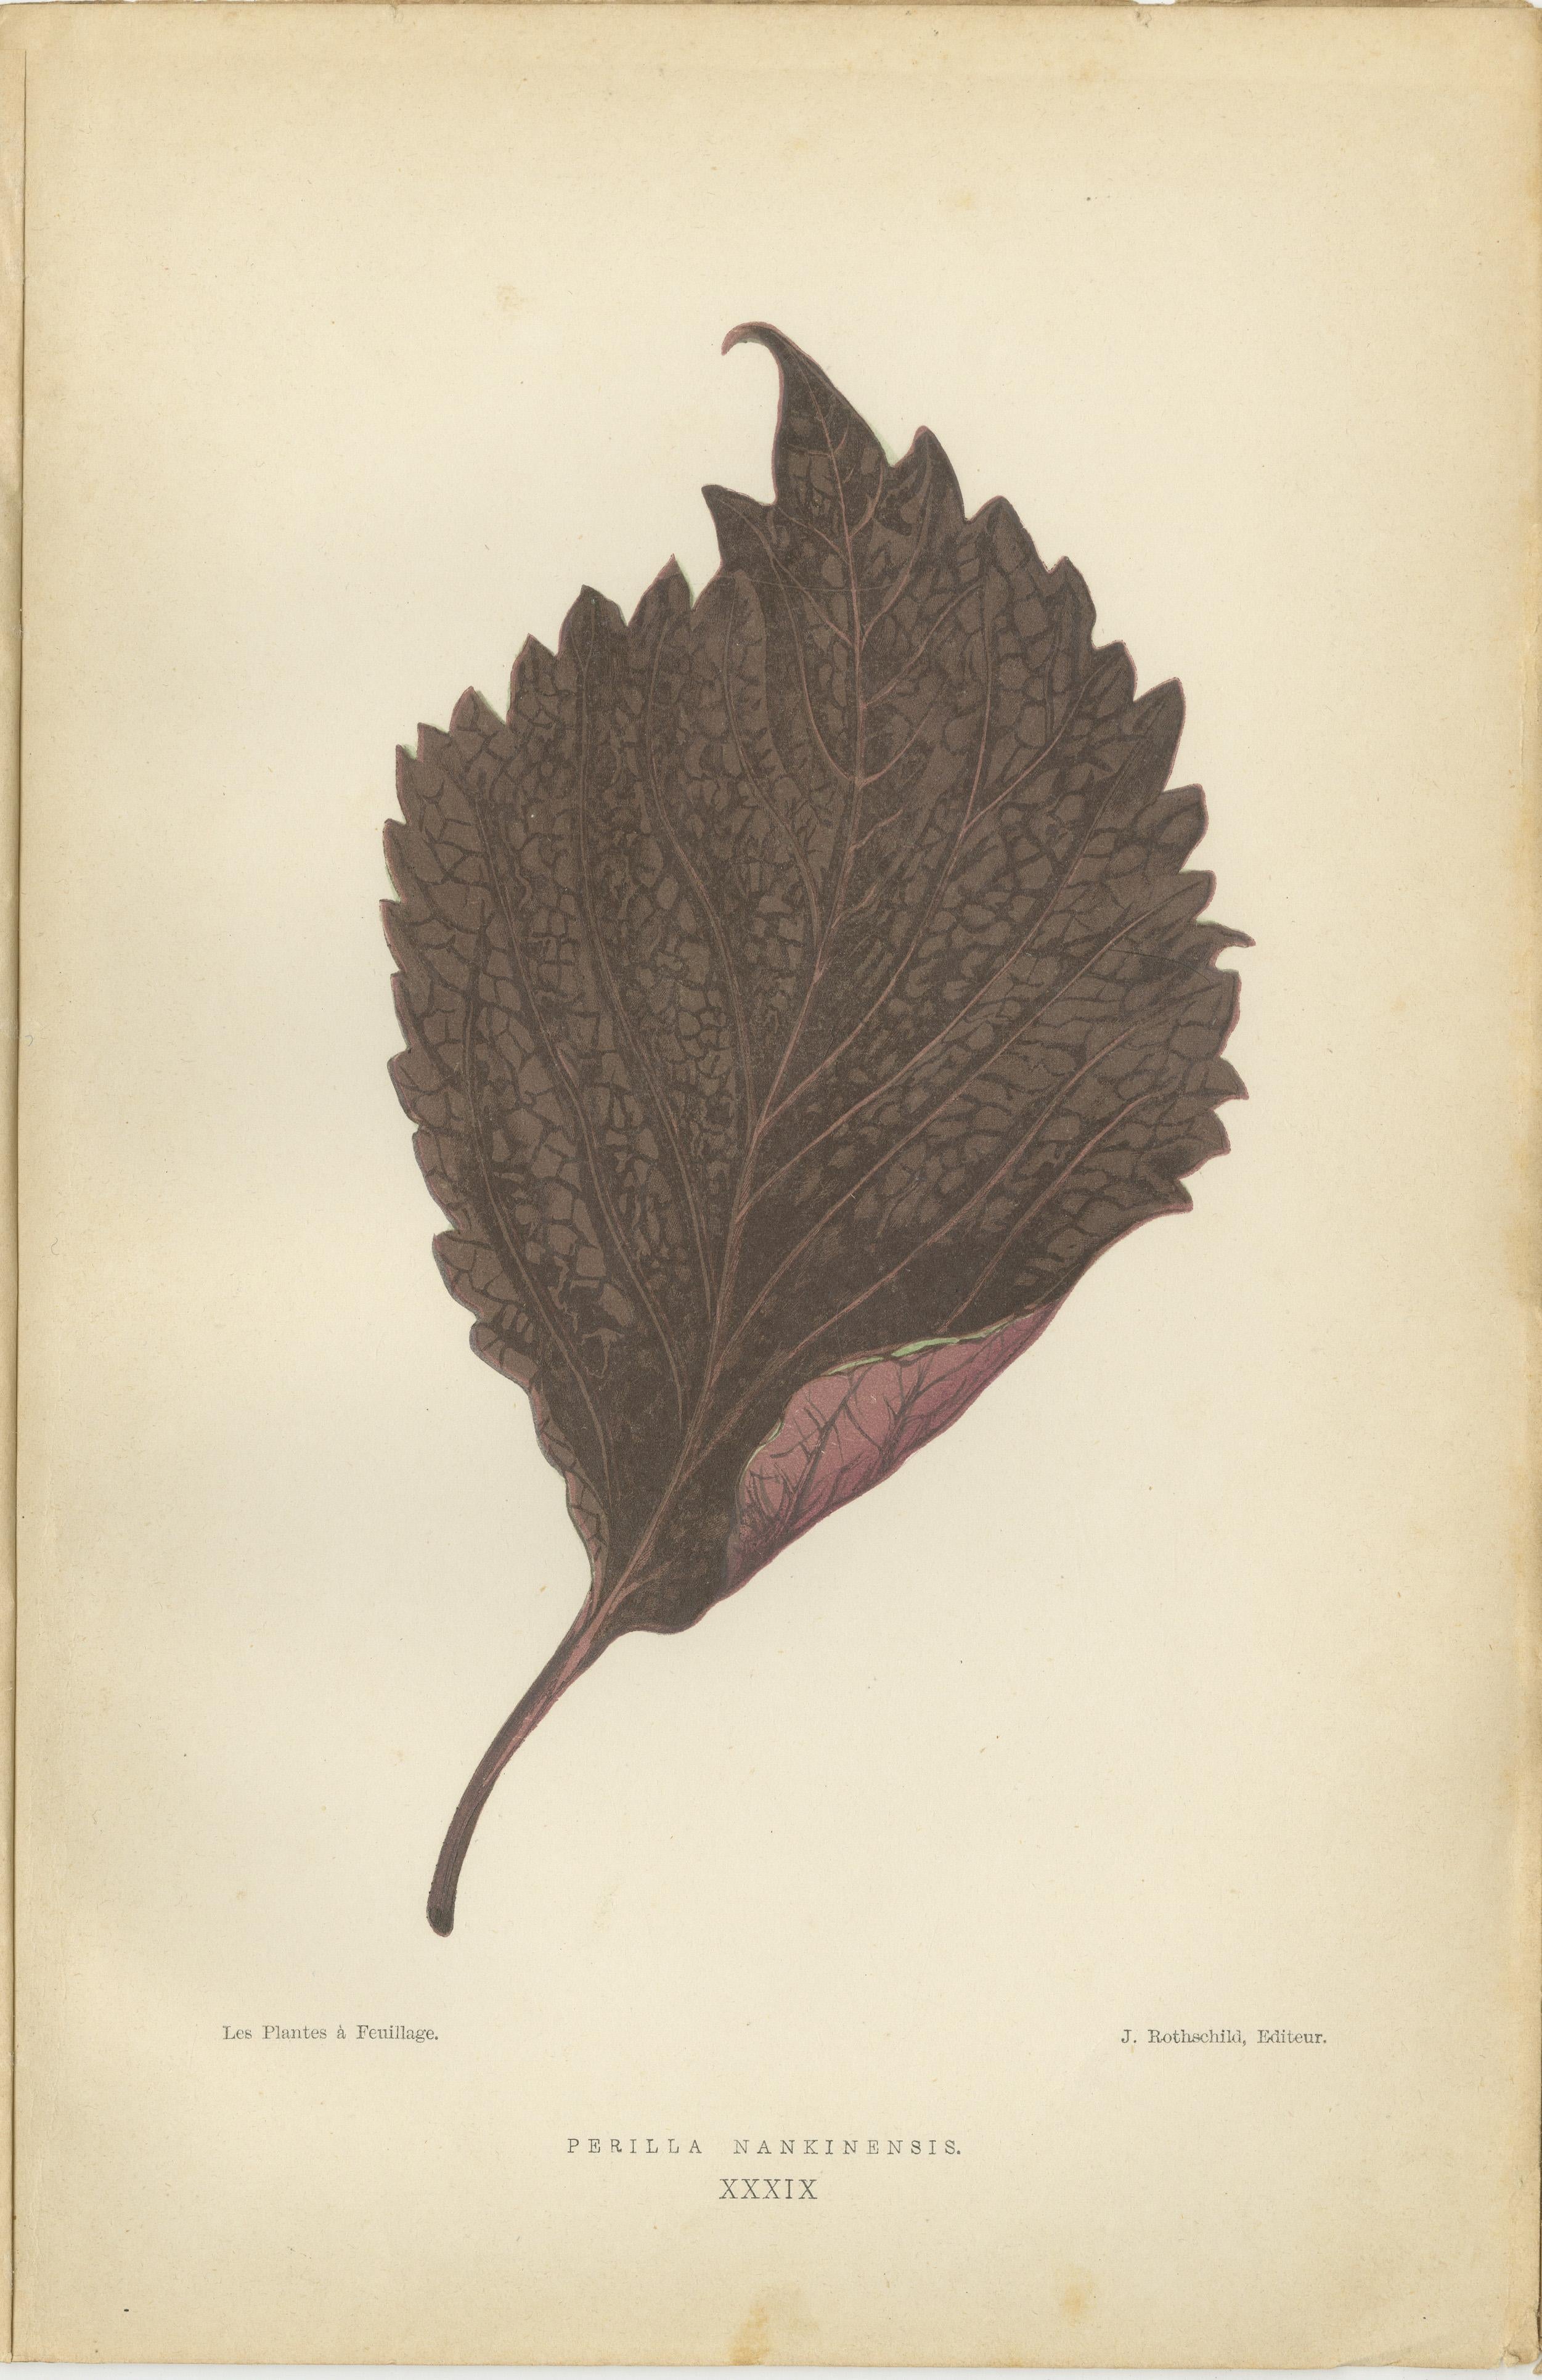 The prints are original antique colored botanical illustrations from the second volume of 